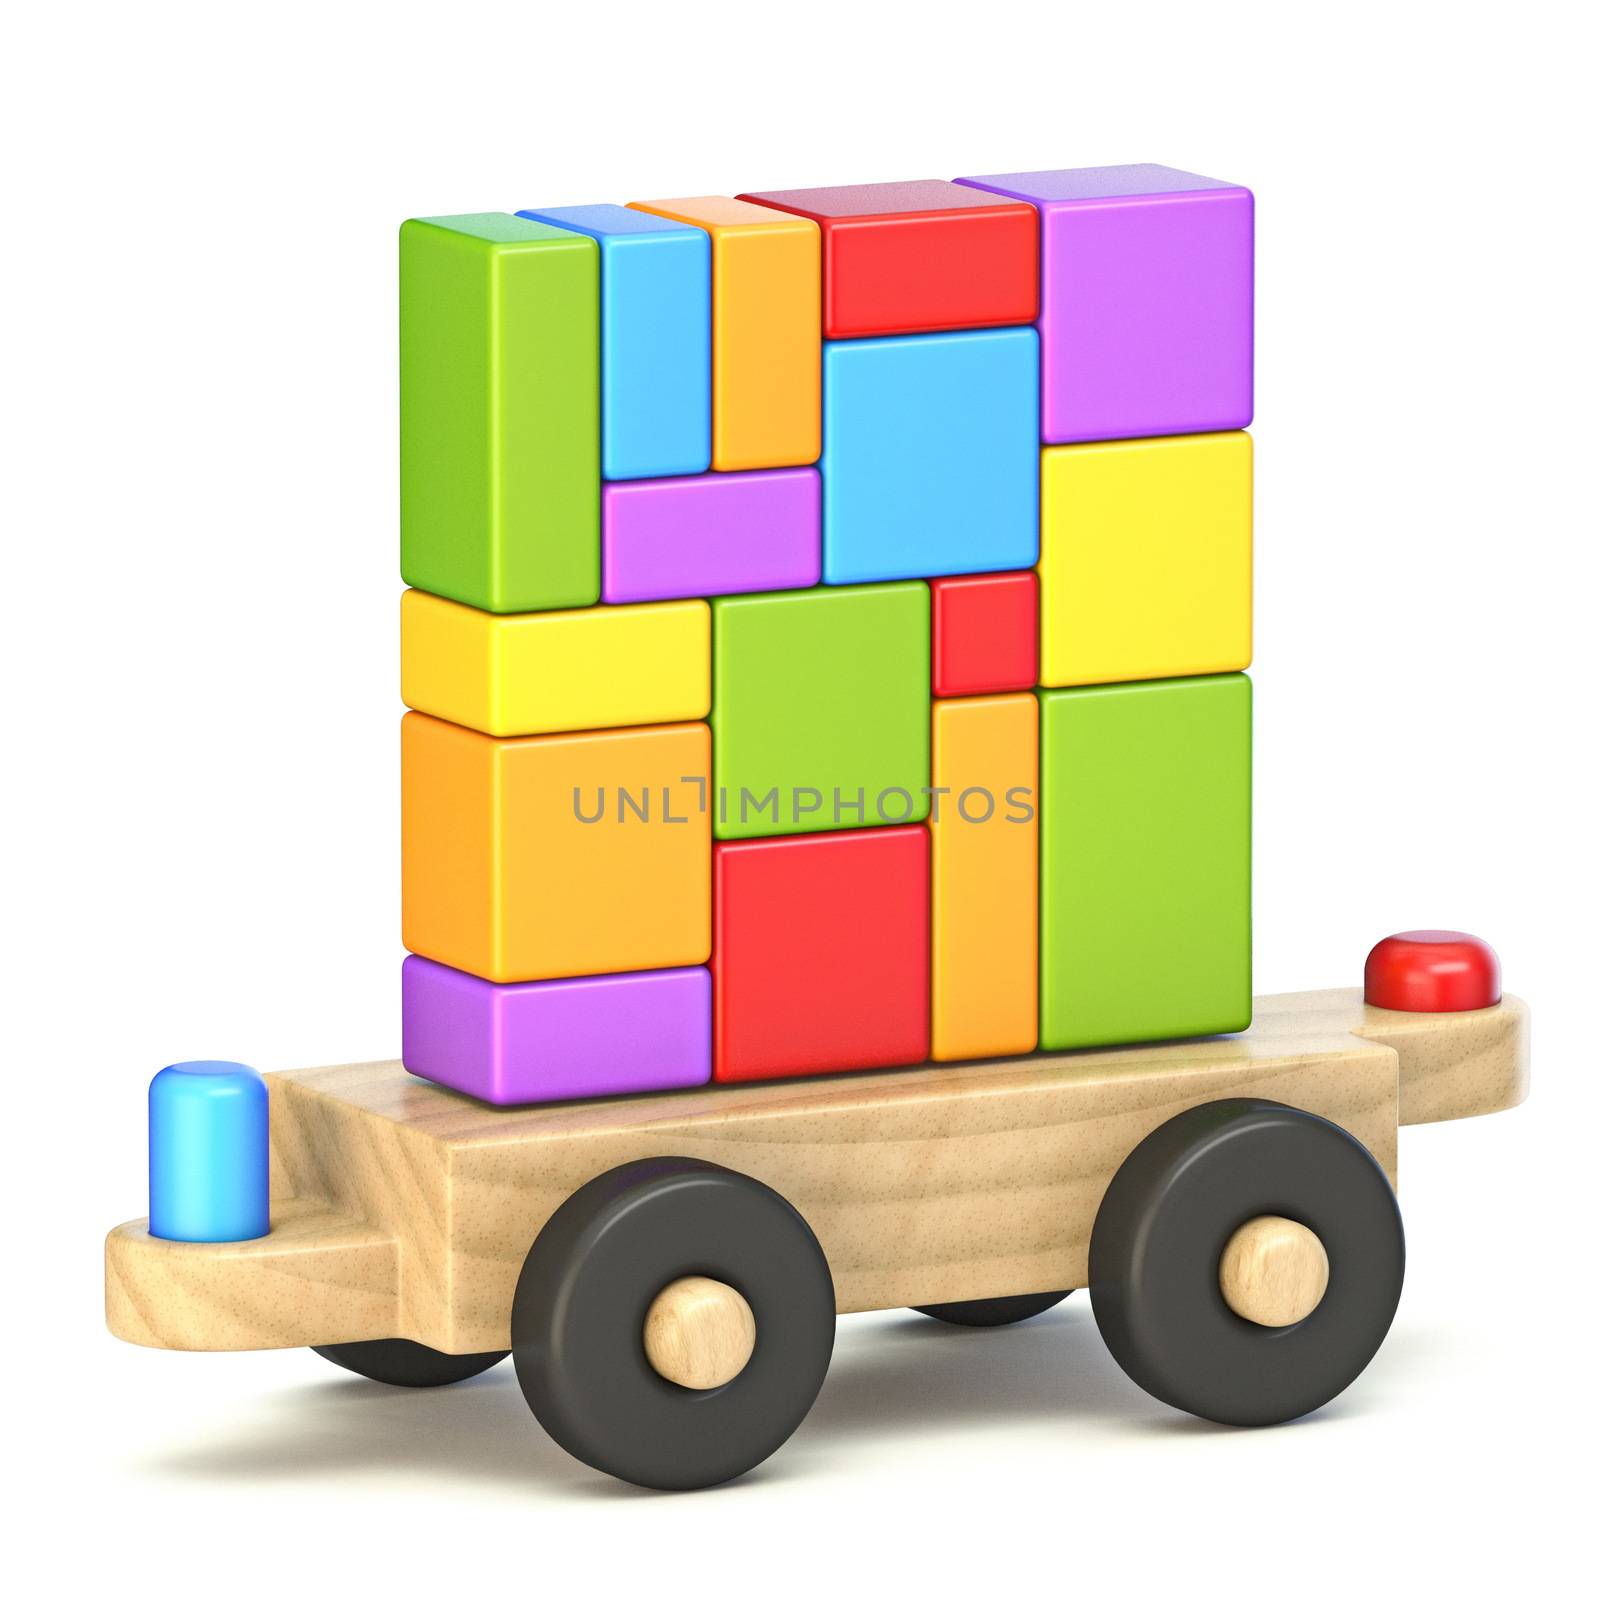 Wooden train wagon with colorful toy bricks 3D render illustration isolated on white background